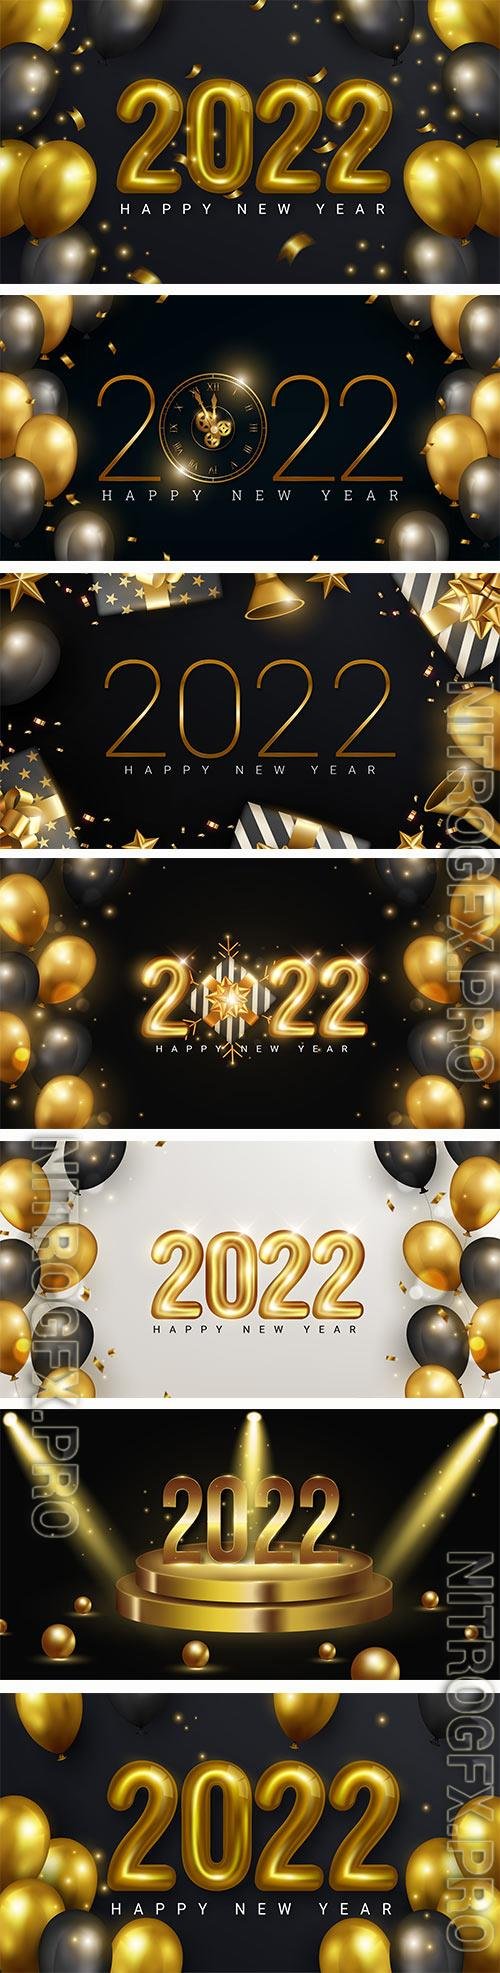 2022 number made by sparkle lights with golden balloons and stars for happy new year concept